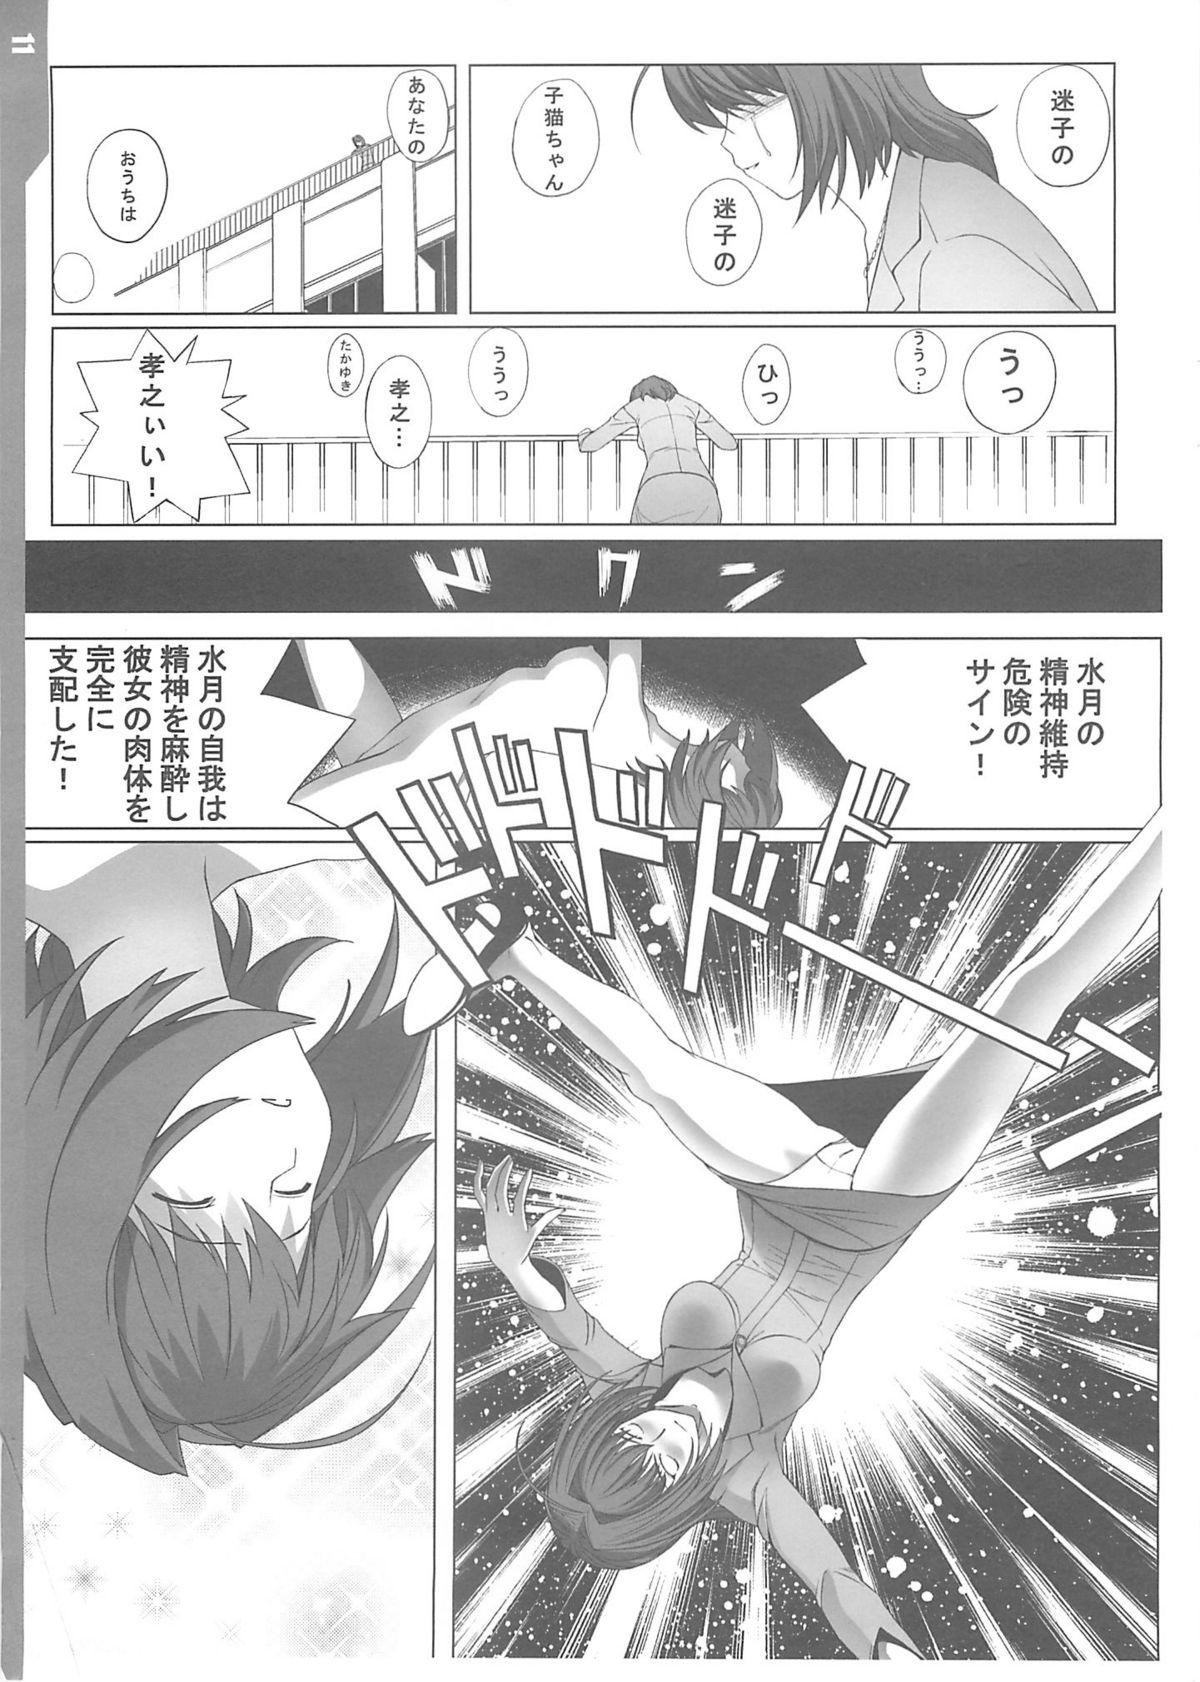 Transsexual Enikki Recycle 7 no Omake Hon - Beat Angel - The idolmaster Wam - Page 11